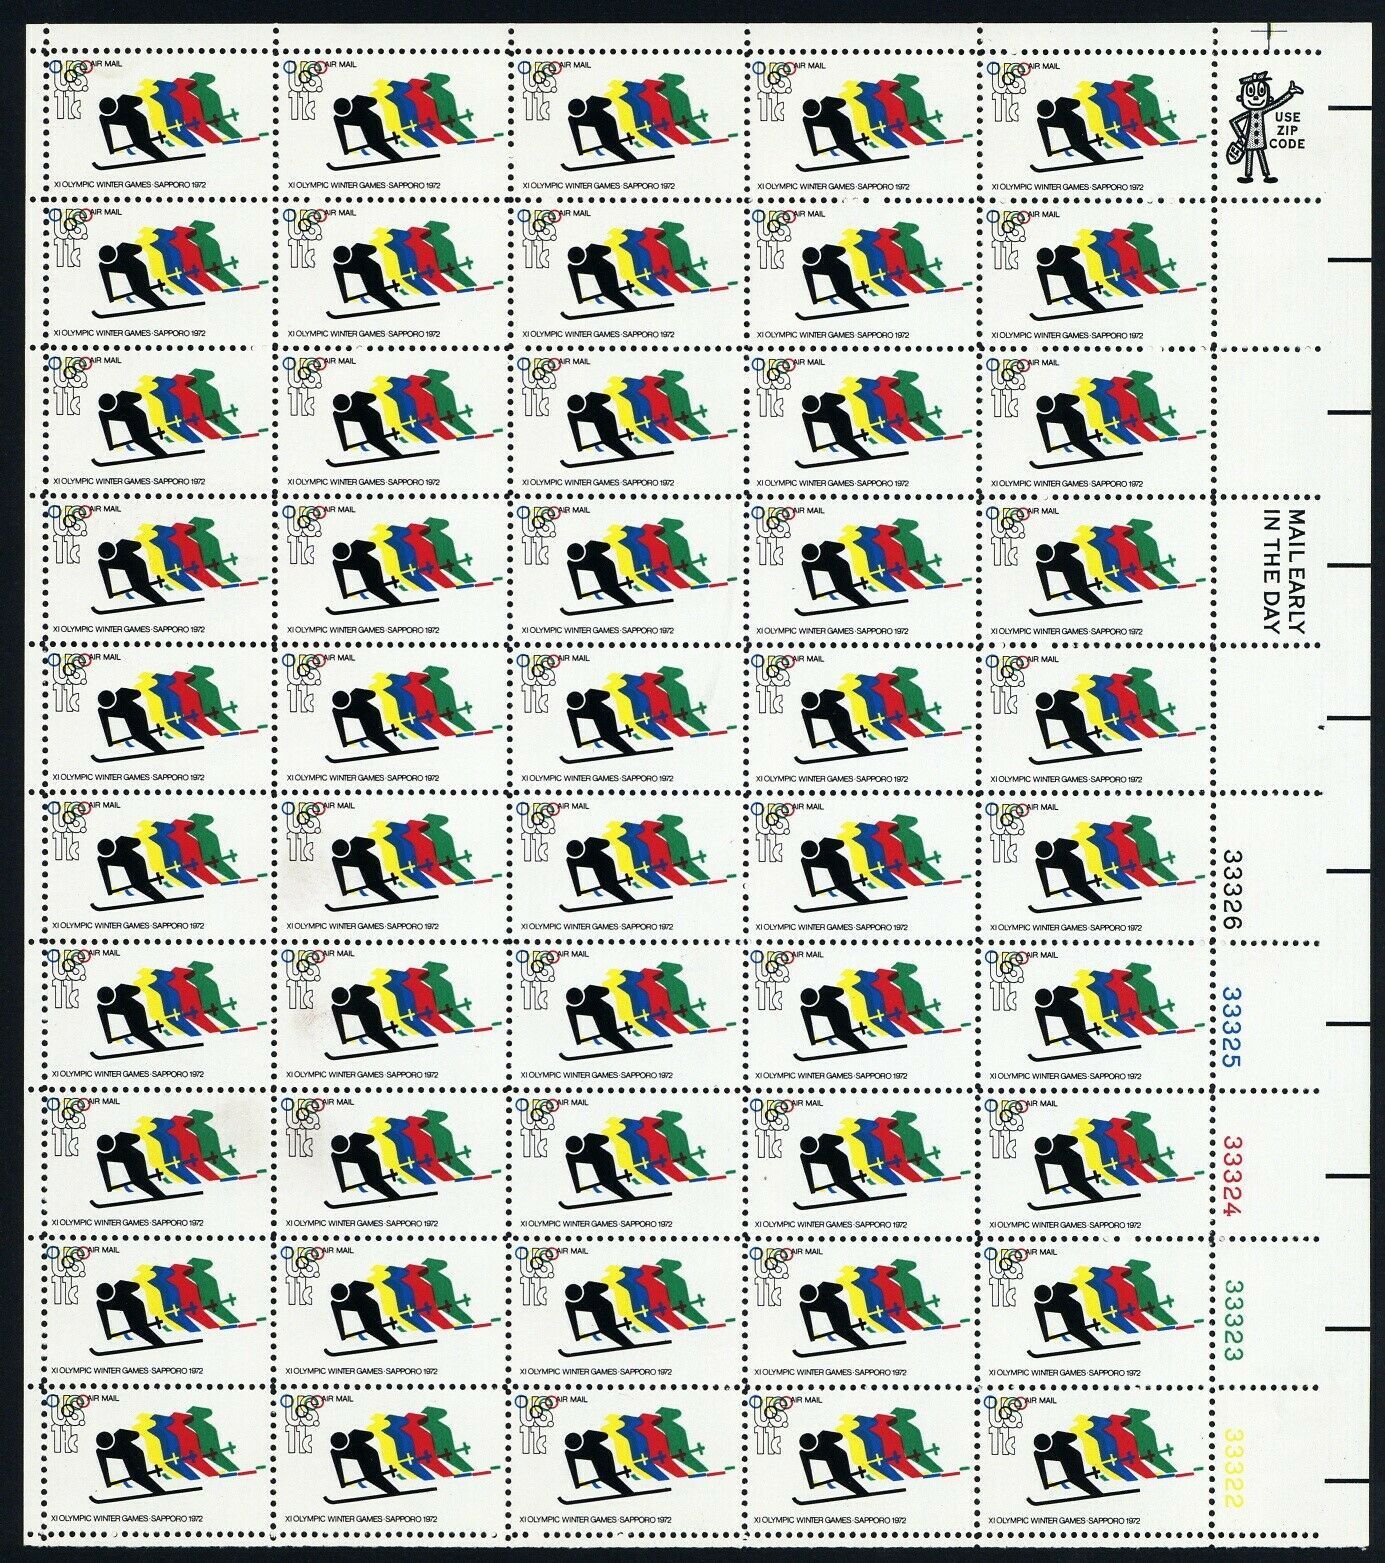 C85, MNH 11¢ Shifted Ring Colors Error In Complete Sheet of 50 - Stuart Katz - $750.00